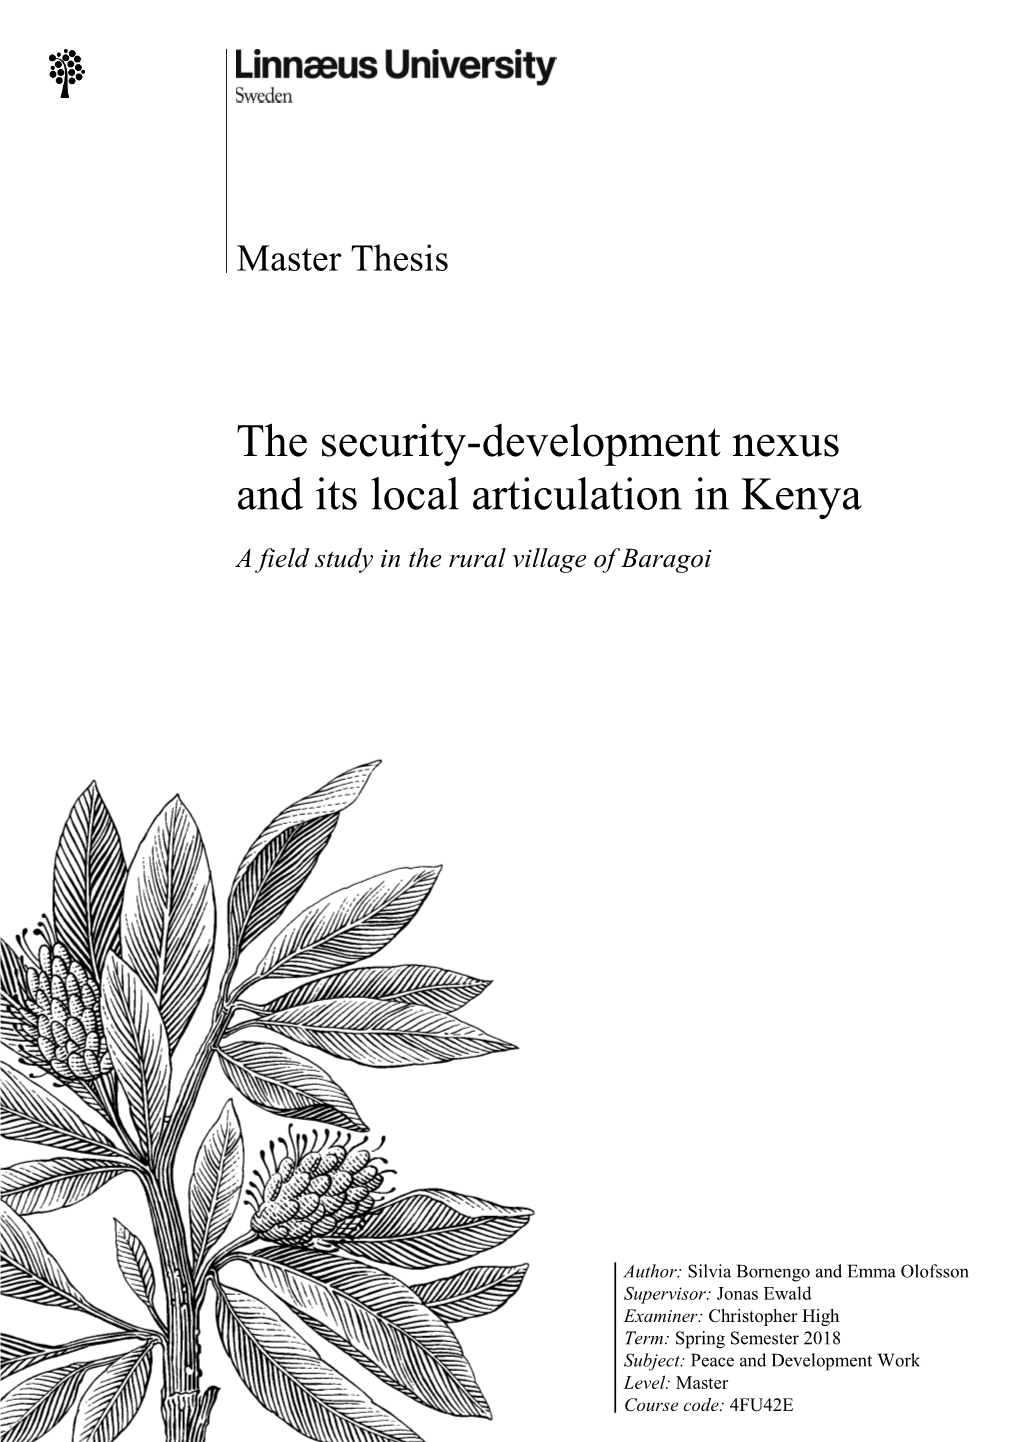 The Security-Development Nexus and Its Local Articulation in Kenya